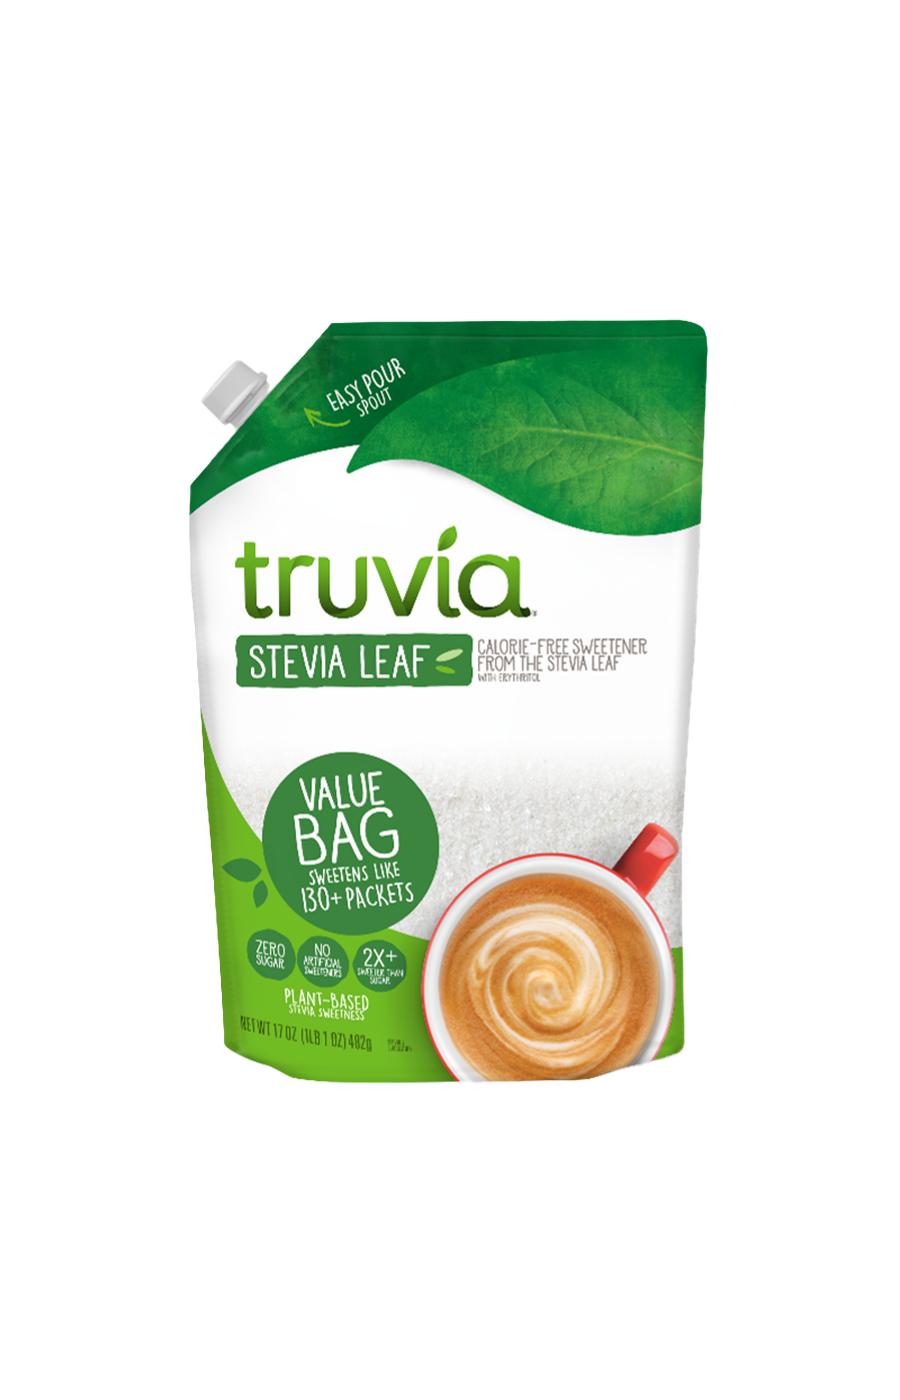 Truvia Calorie-Free Stevia Leaf Sweetener Blended With Erythritol; image 1 of 2